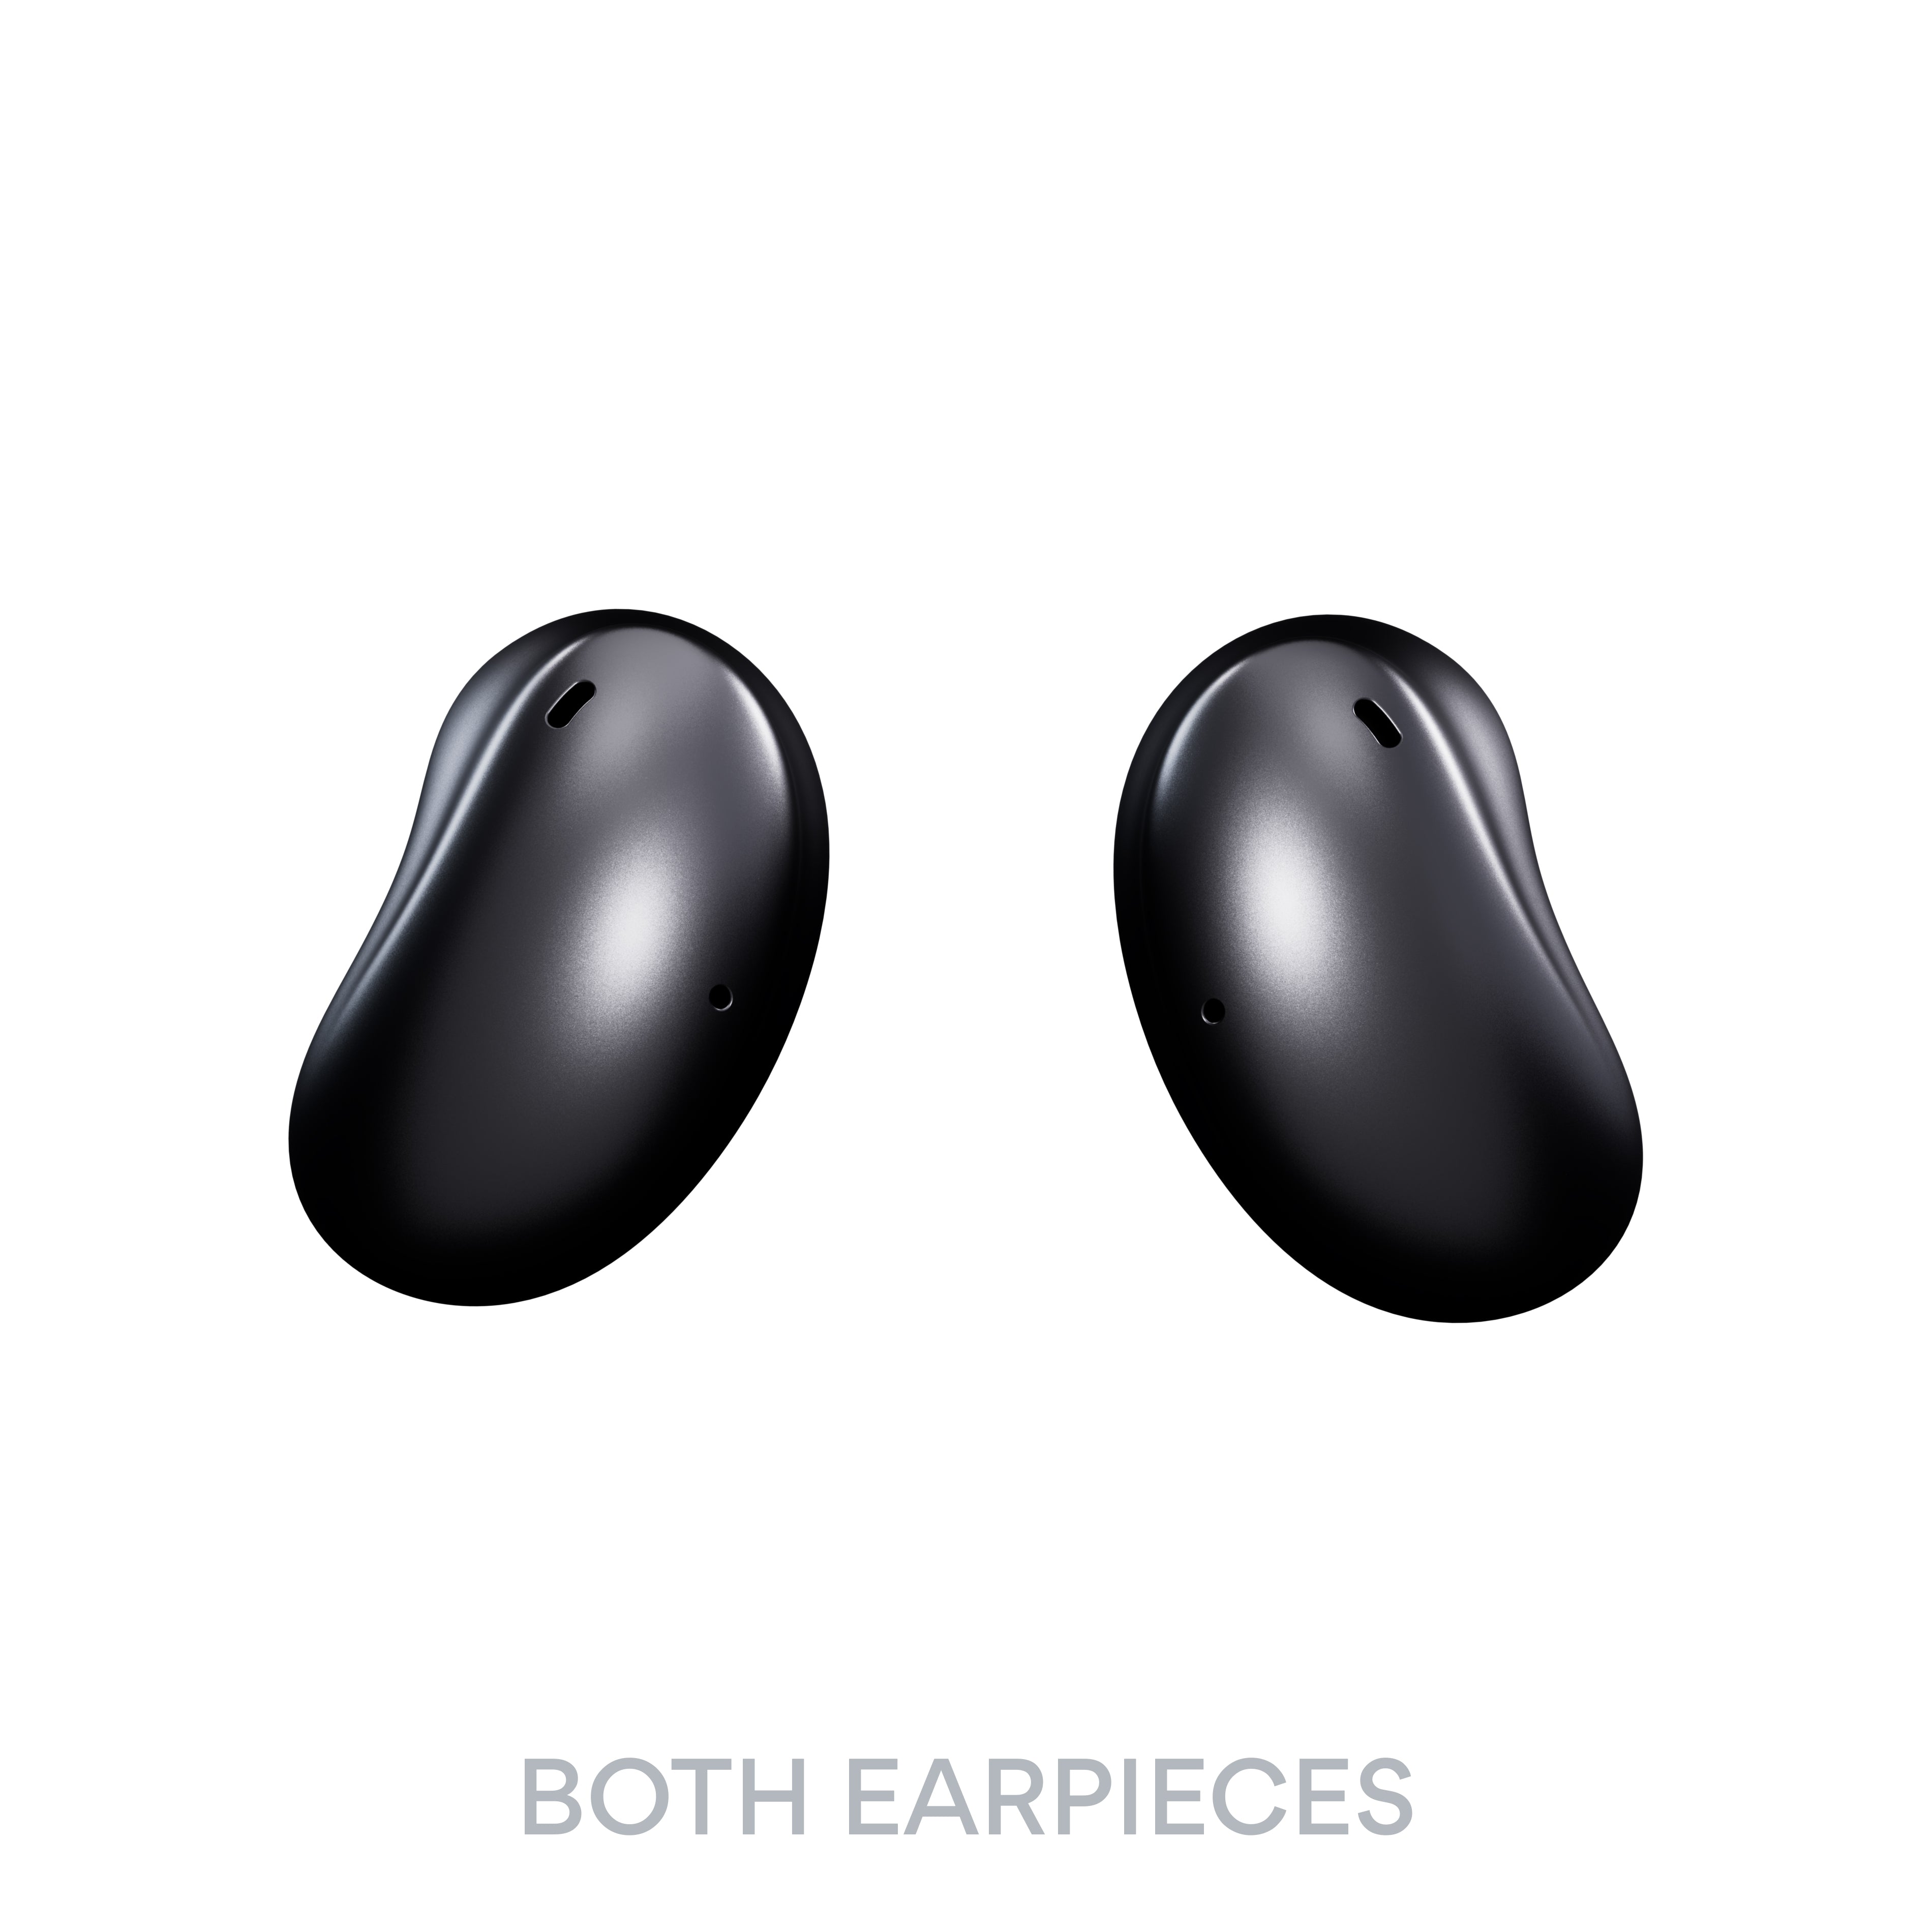 Image of Replacement Parts for Pebbles True Wireless Earbuds.